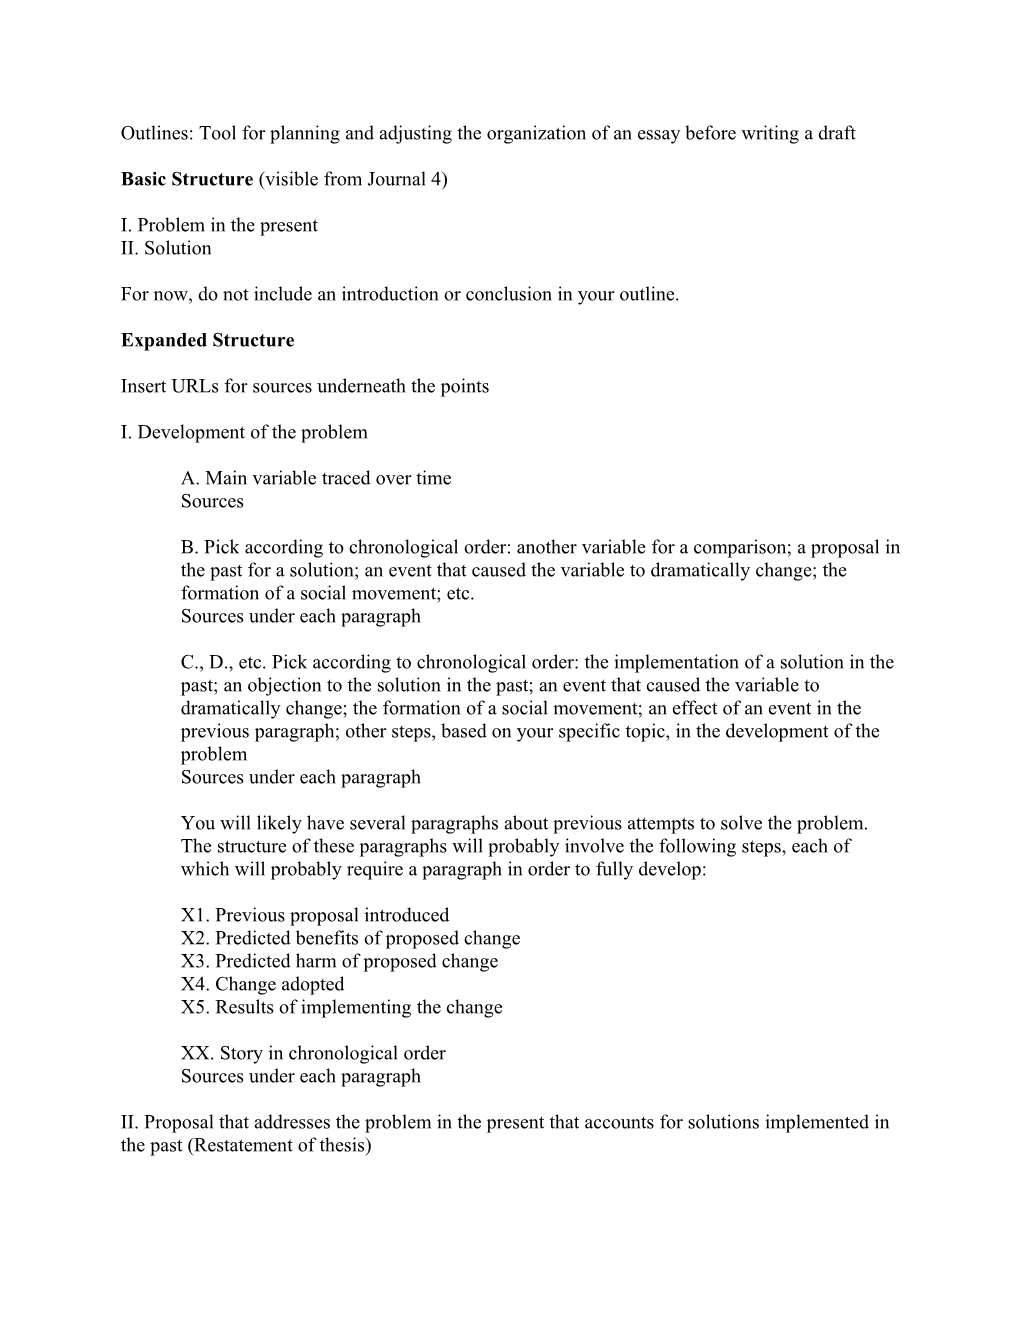 Outlines: Tool for Planning and Adjusting the Organization of an Essay Before Writing a Draft